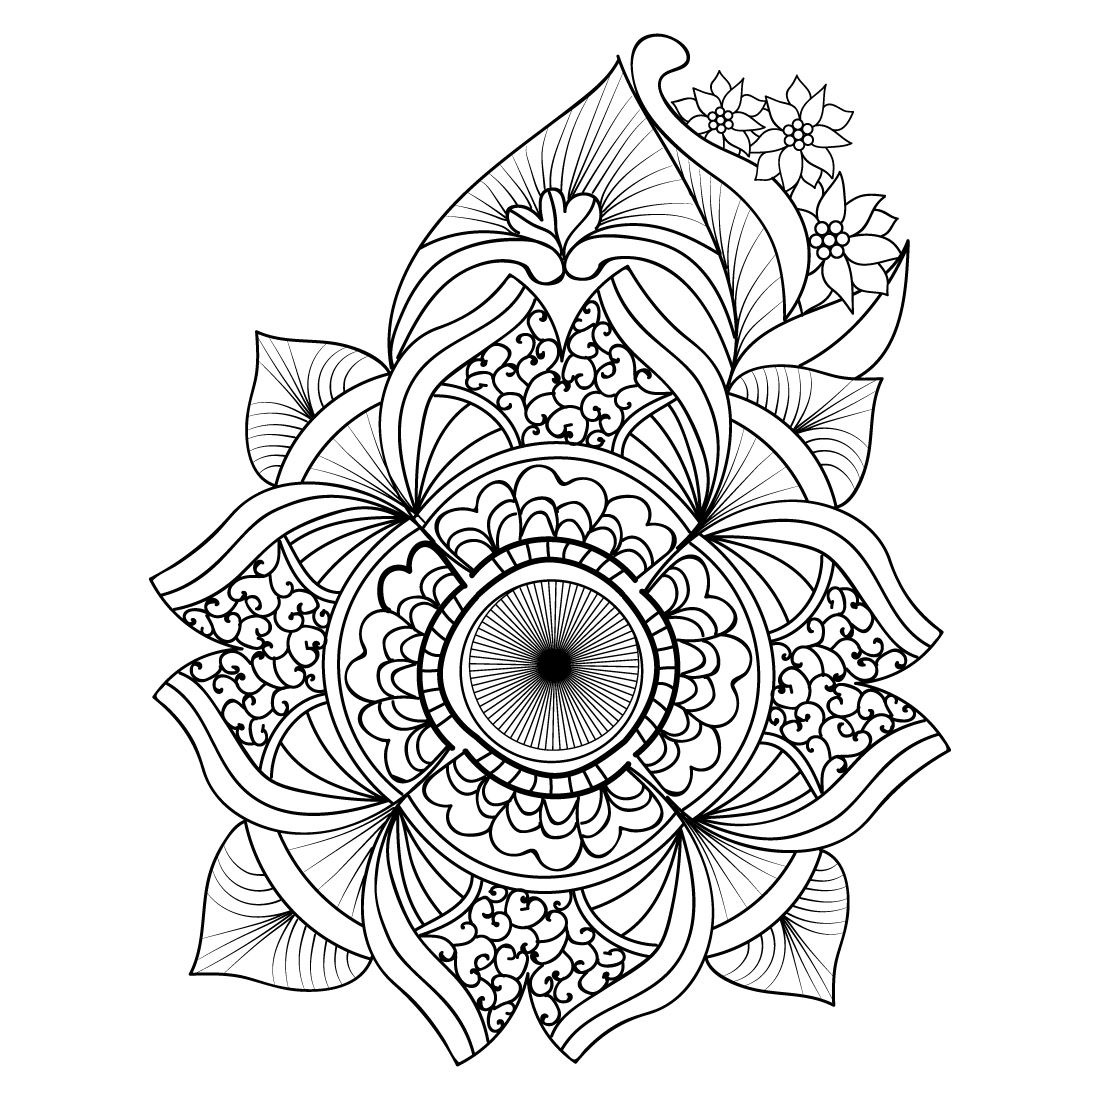 Mamdala design, hand drawn black and illustration, line drawing, pencil art, engraved ink art, ornamental mandala design, coloring pages for adults preview image.